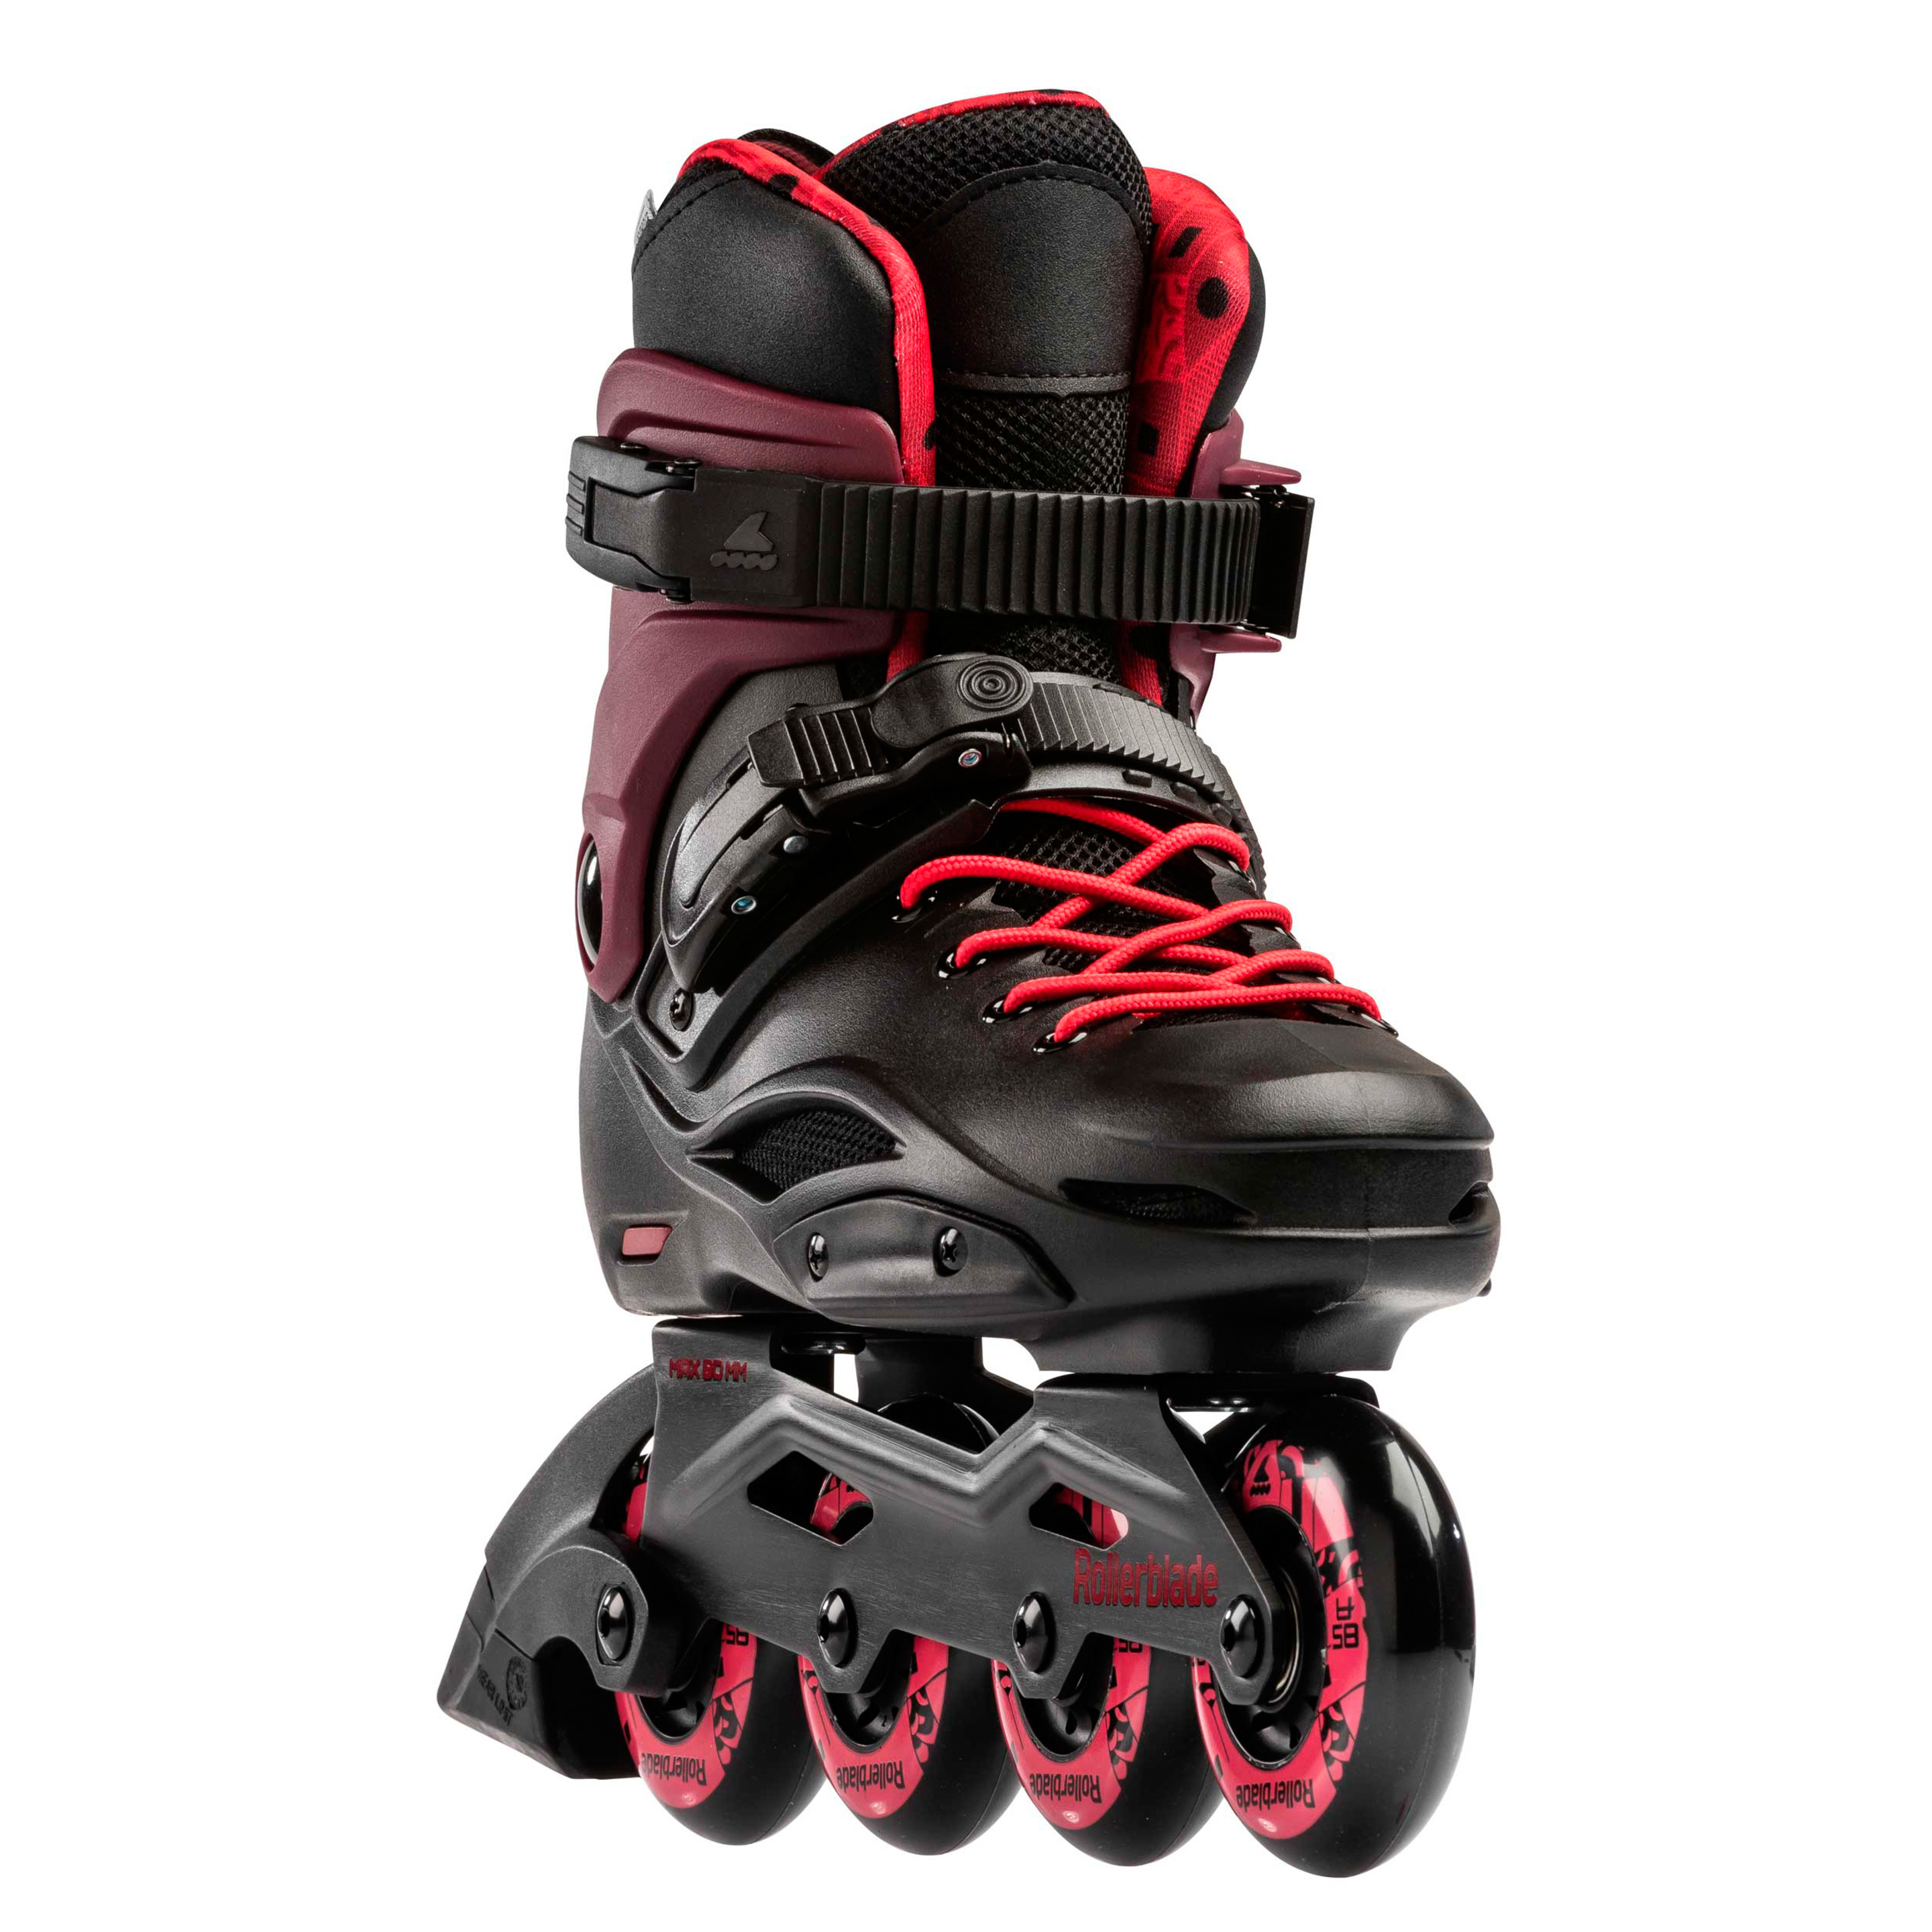 Patines De Mujer Rollerblade Rb Cruiser W